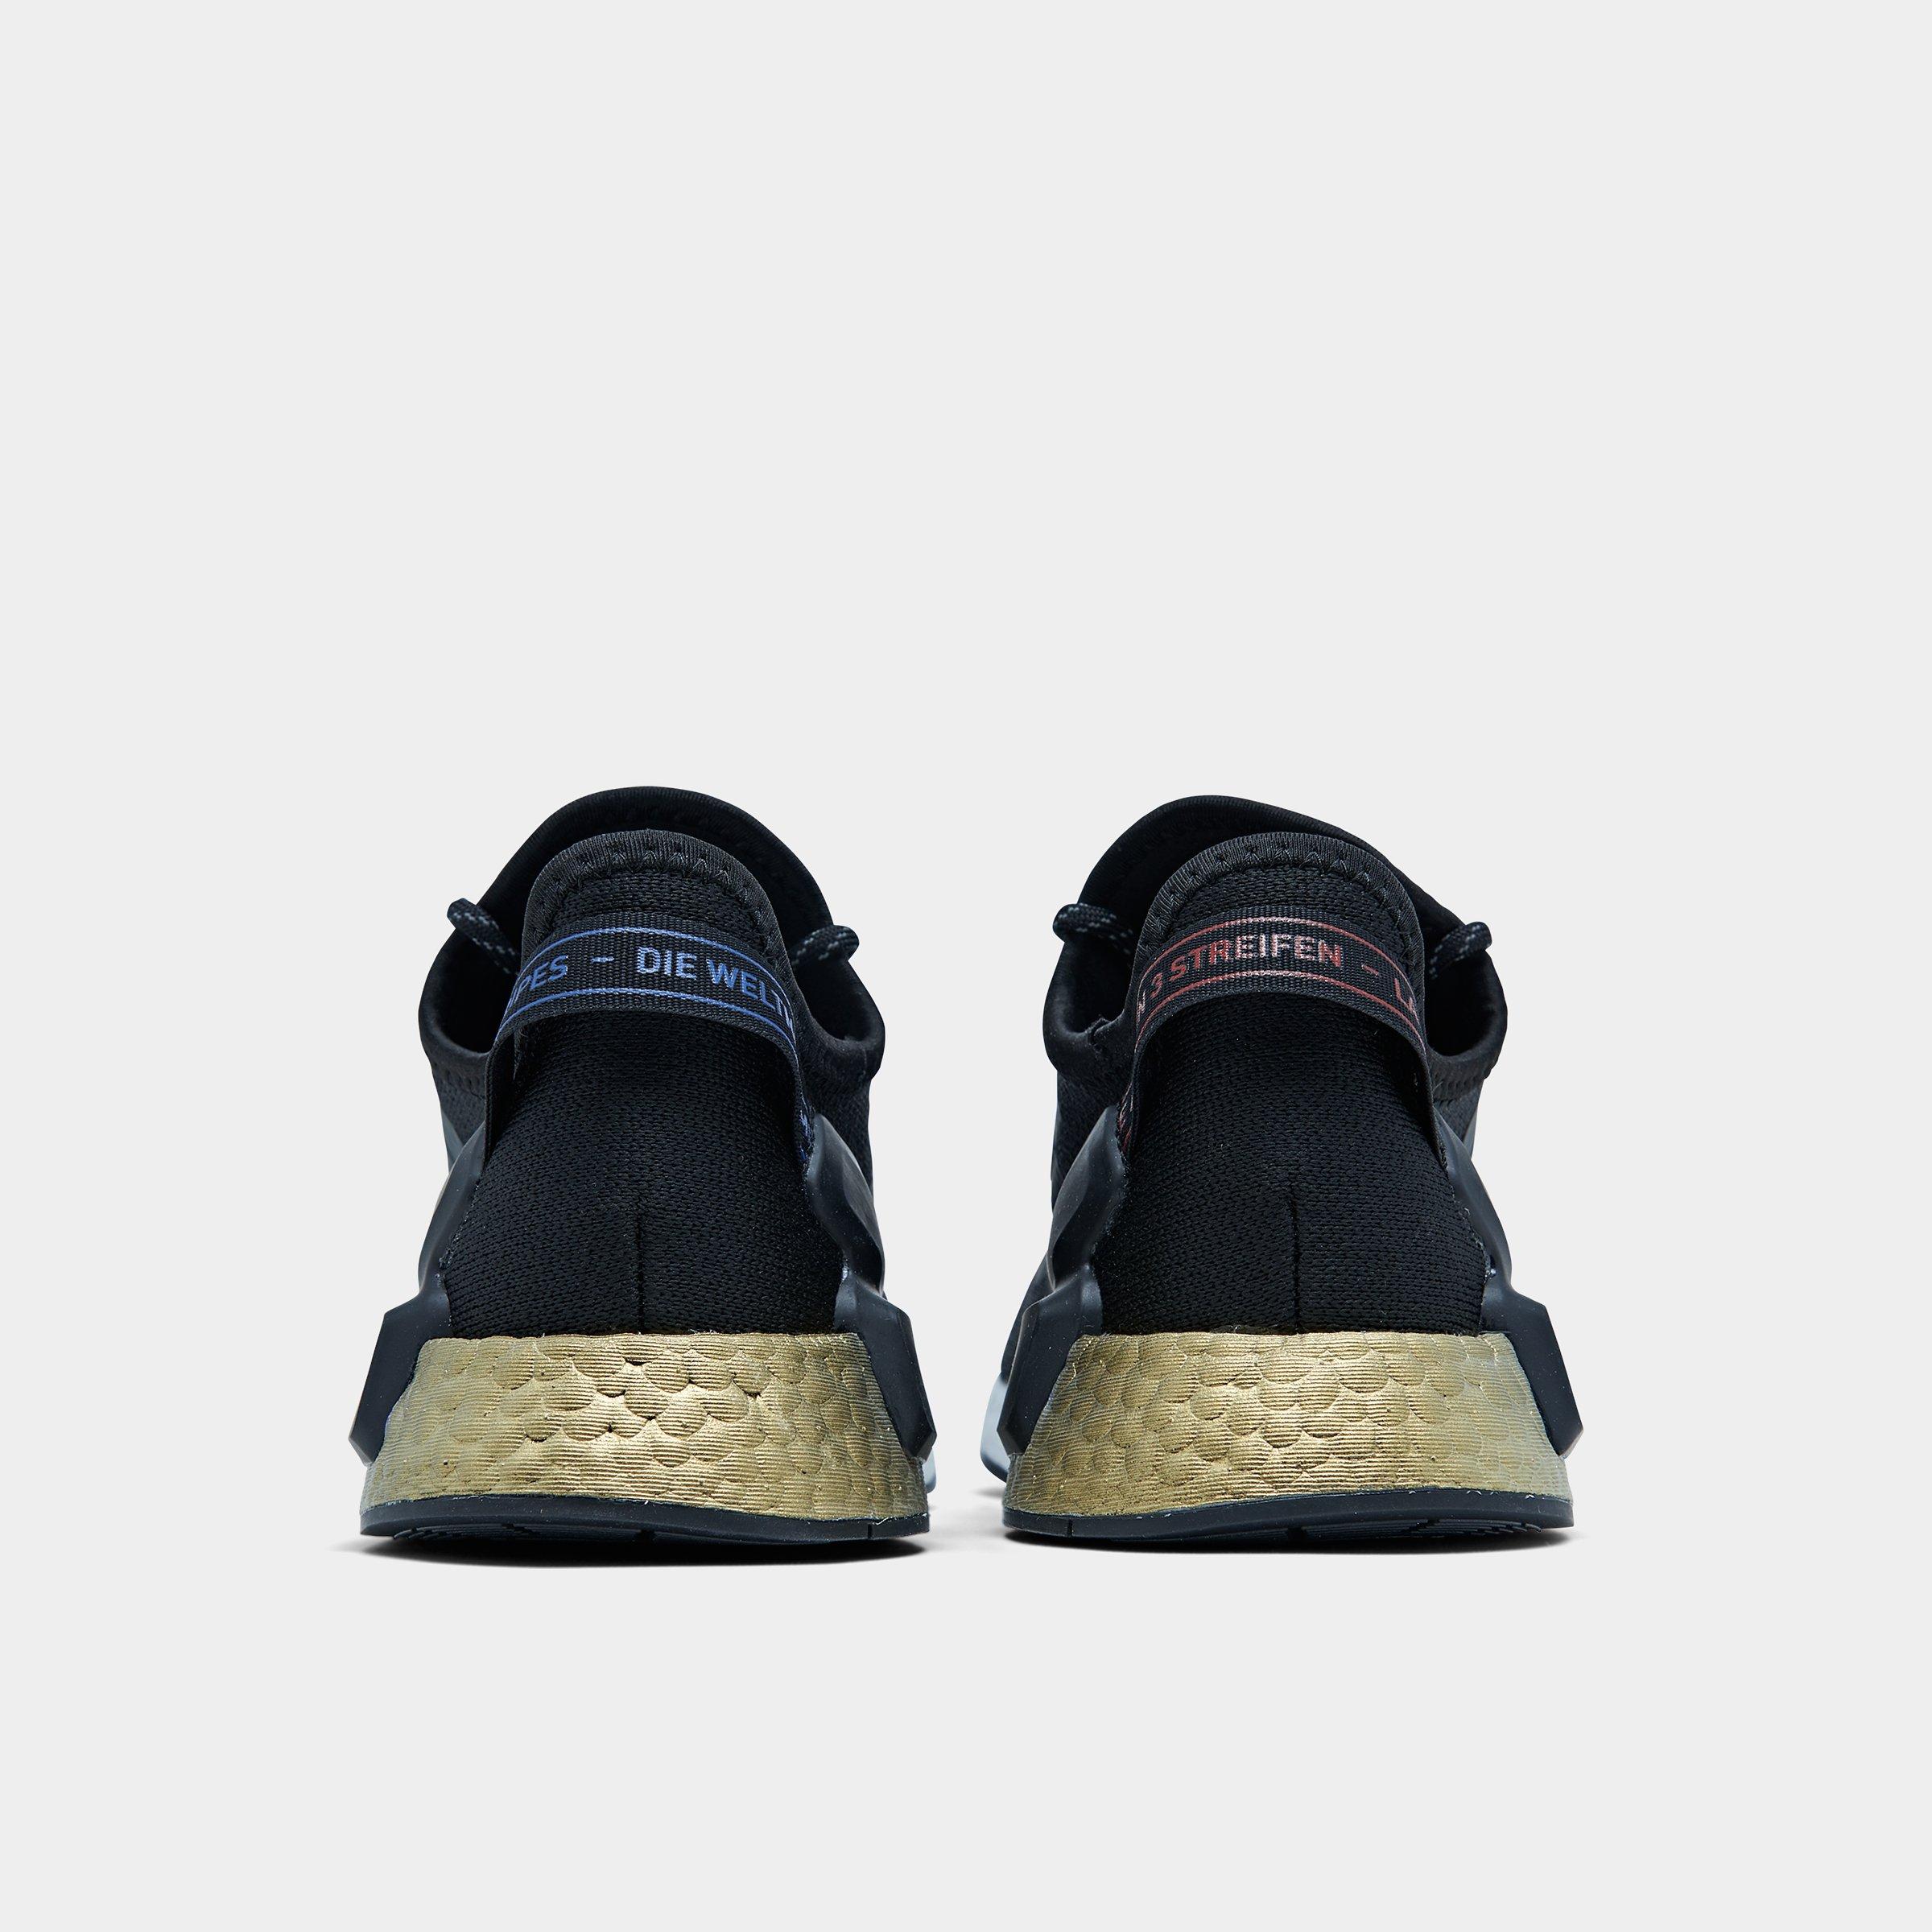 A New adidas NMD R1 Black Mesh Dropped For Women